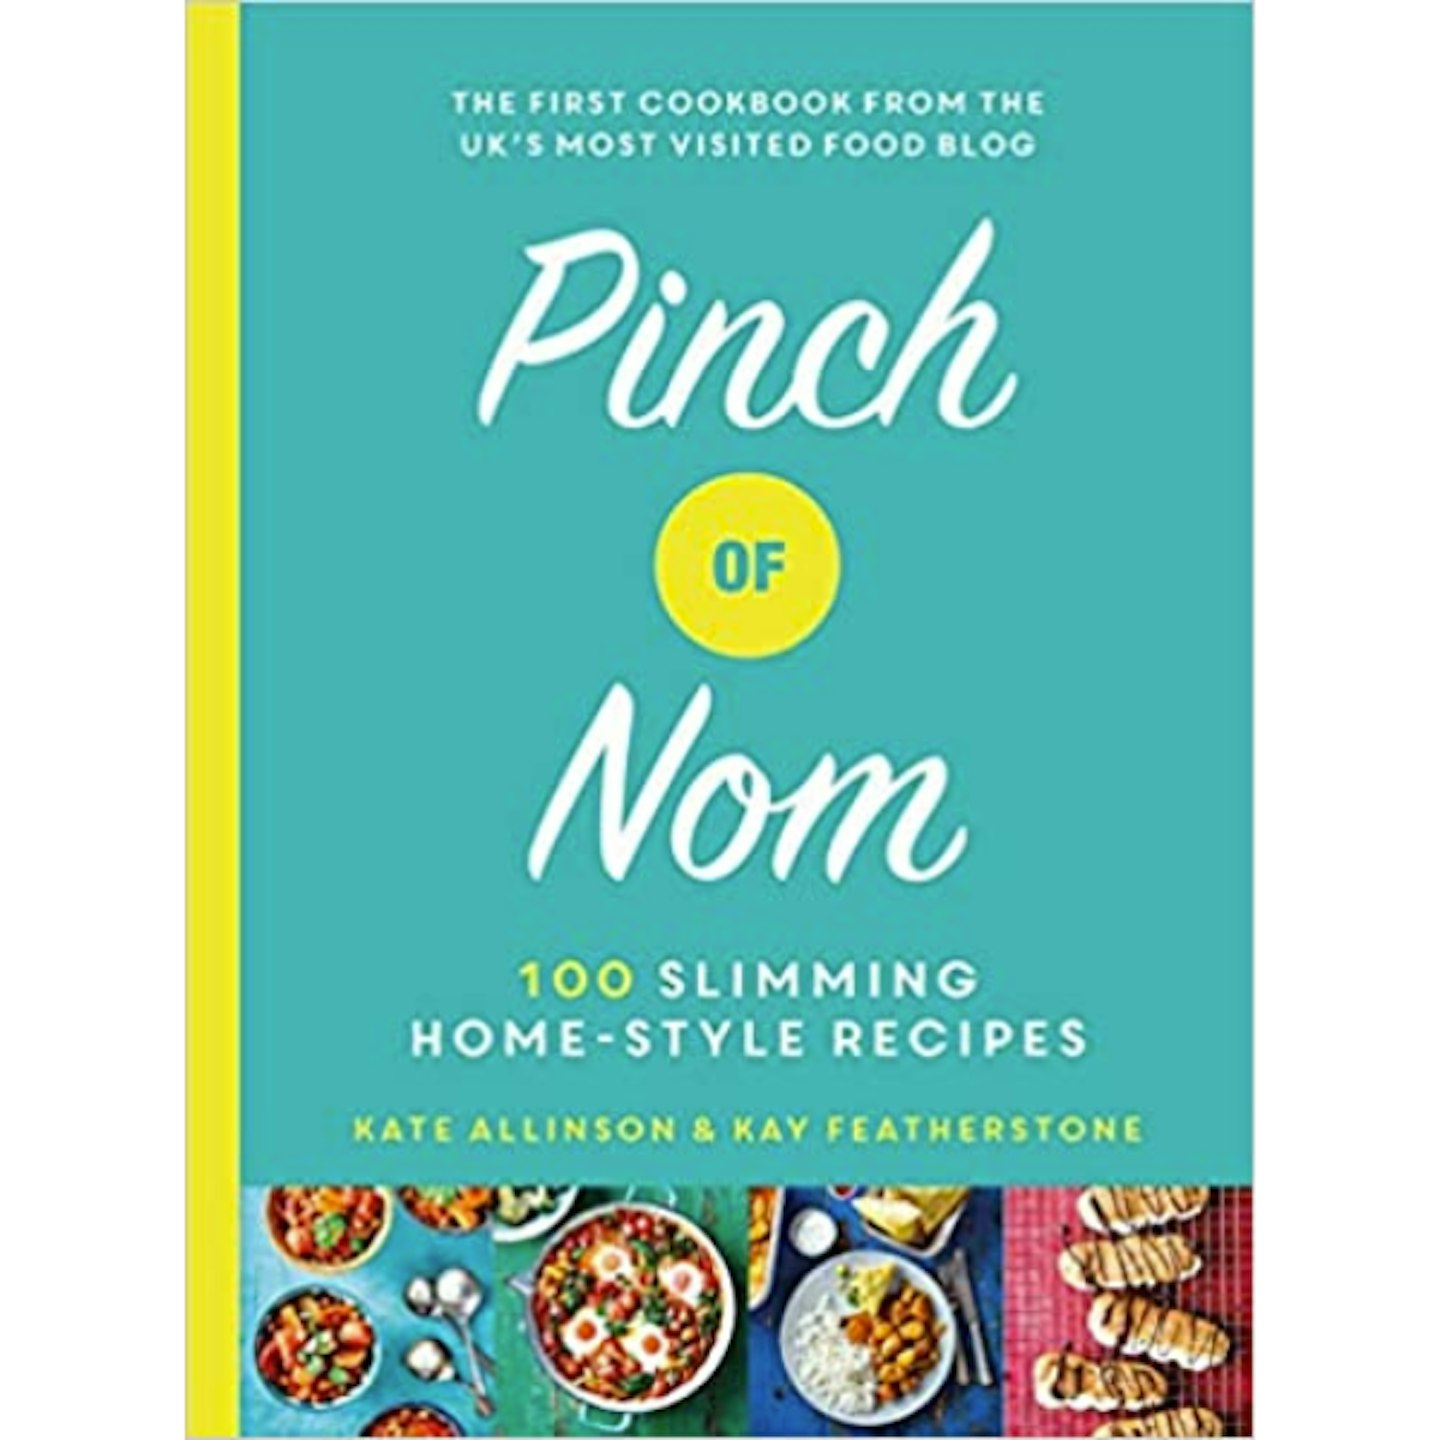 Pinch of Nom: 100 Slimming, Home-style Recipes by Kay Featherstone & Kate Allinson  